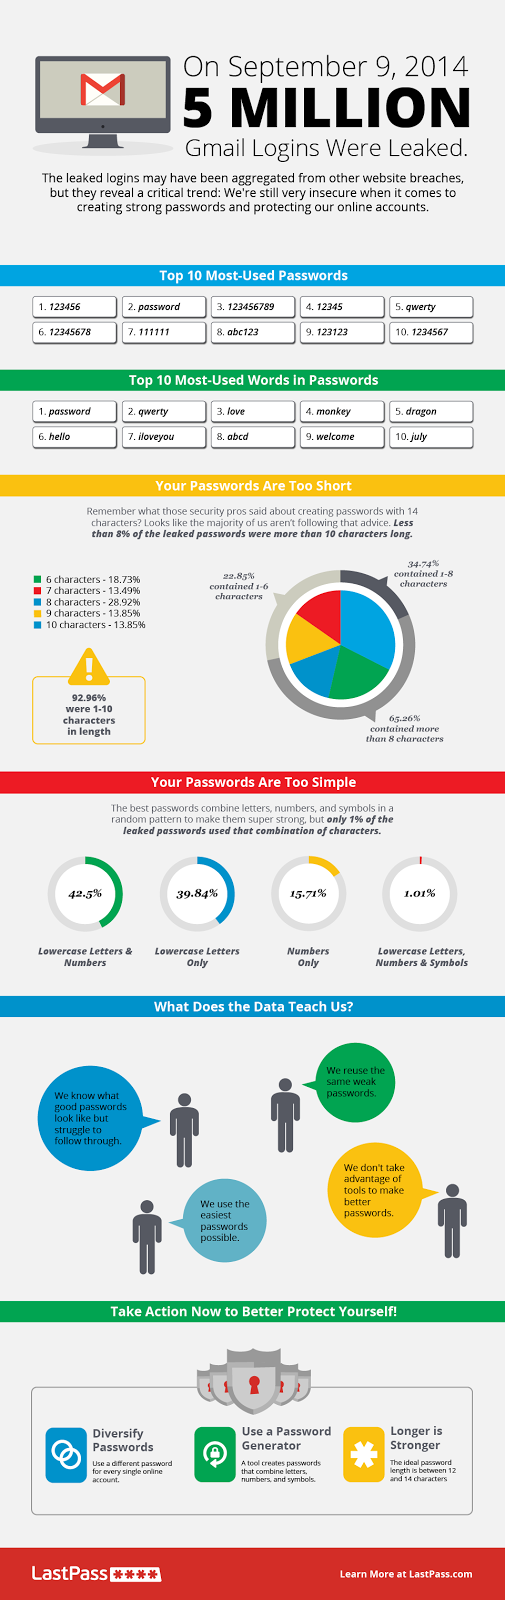 The Scary Truth About Your Passwords: An Analysis of the Gmail Leak infographic